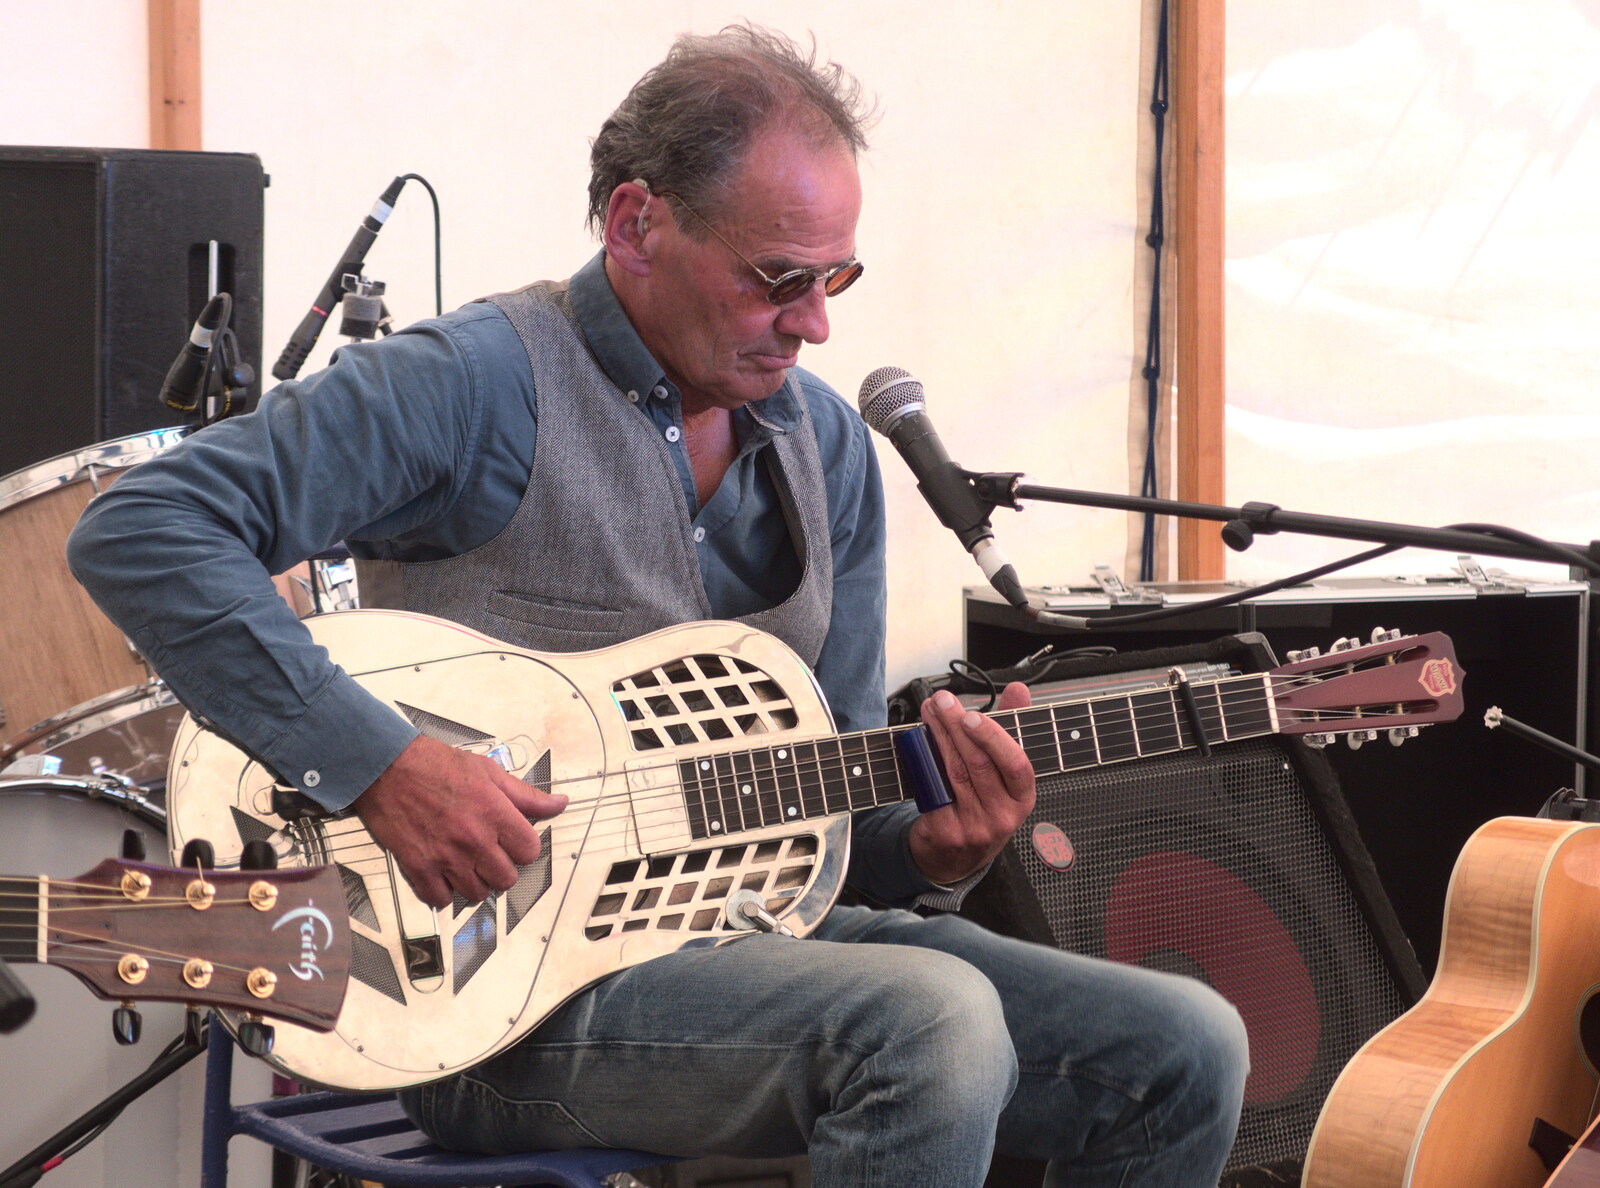 A big resonator guitar from WoW Festival, Burston, Norfolk - 29th June - 1st July 2018